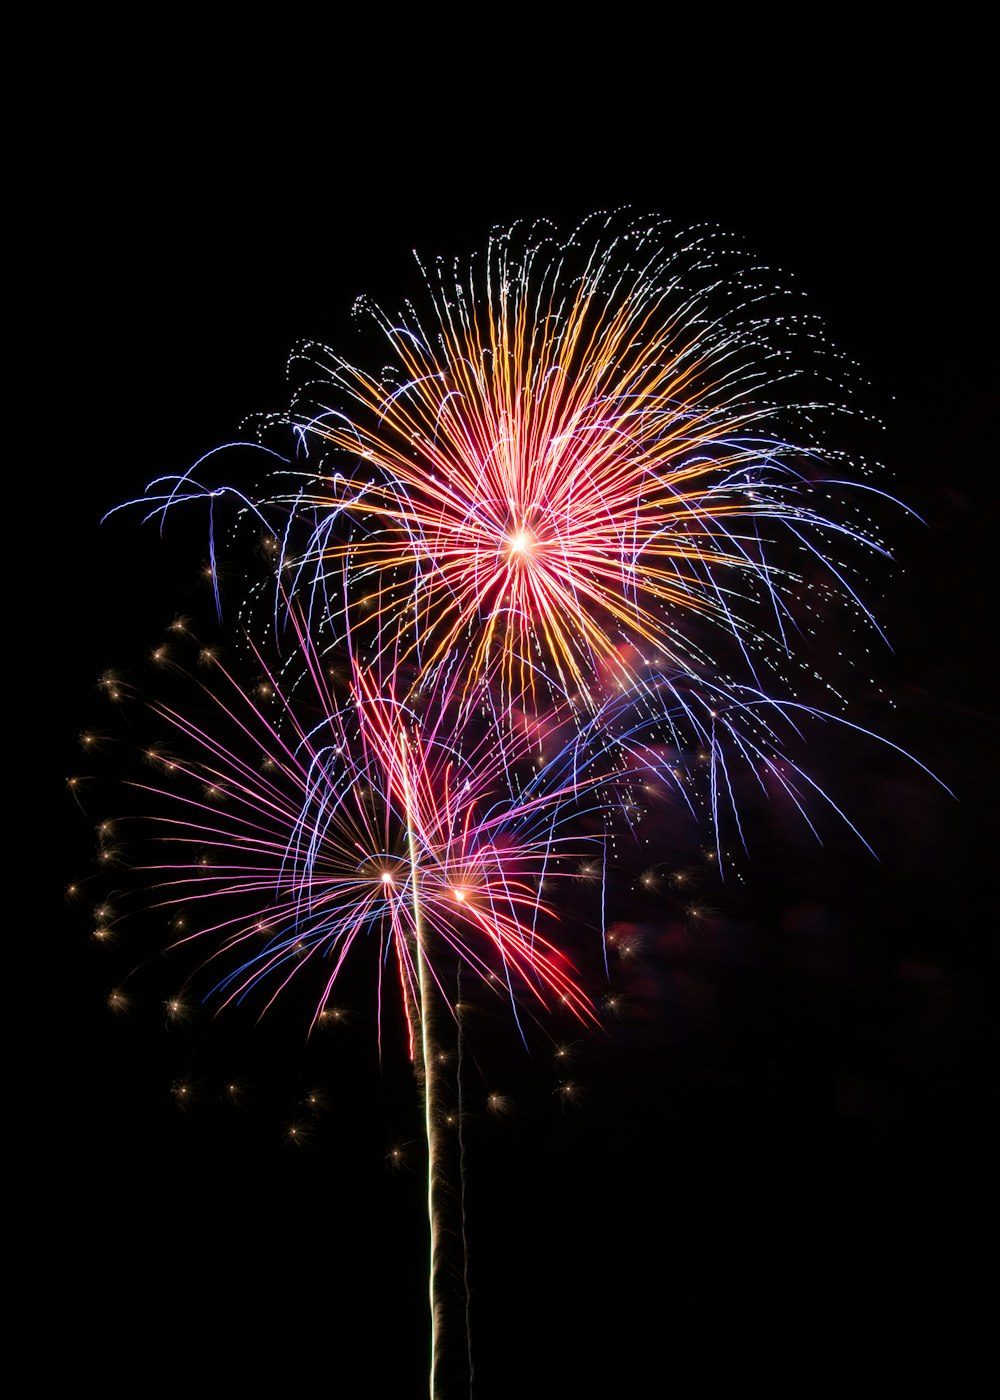 red and yellow fireworks display during nighttime